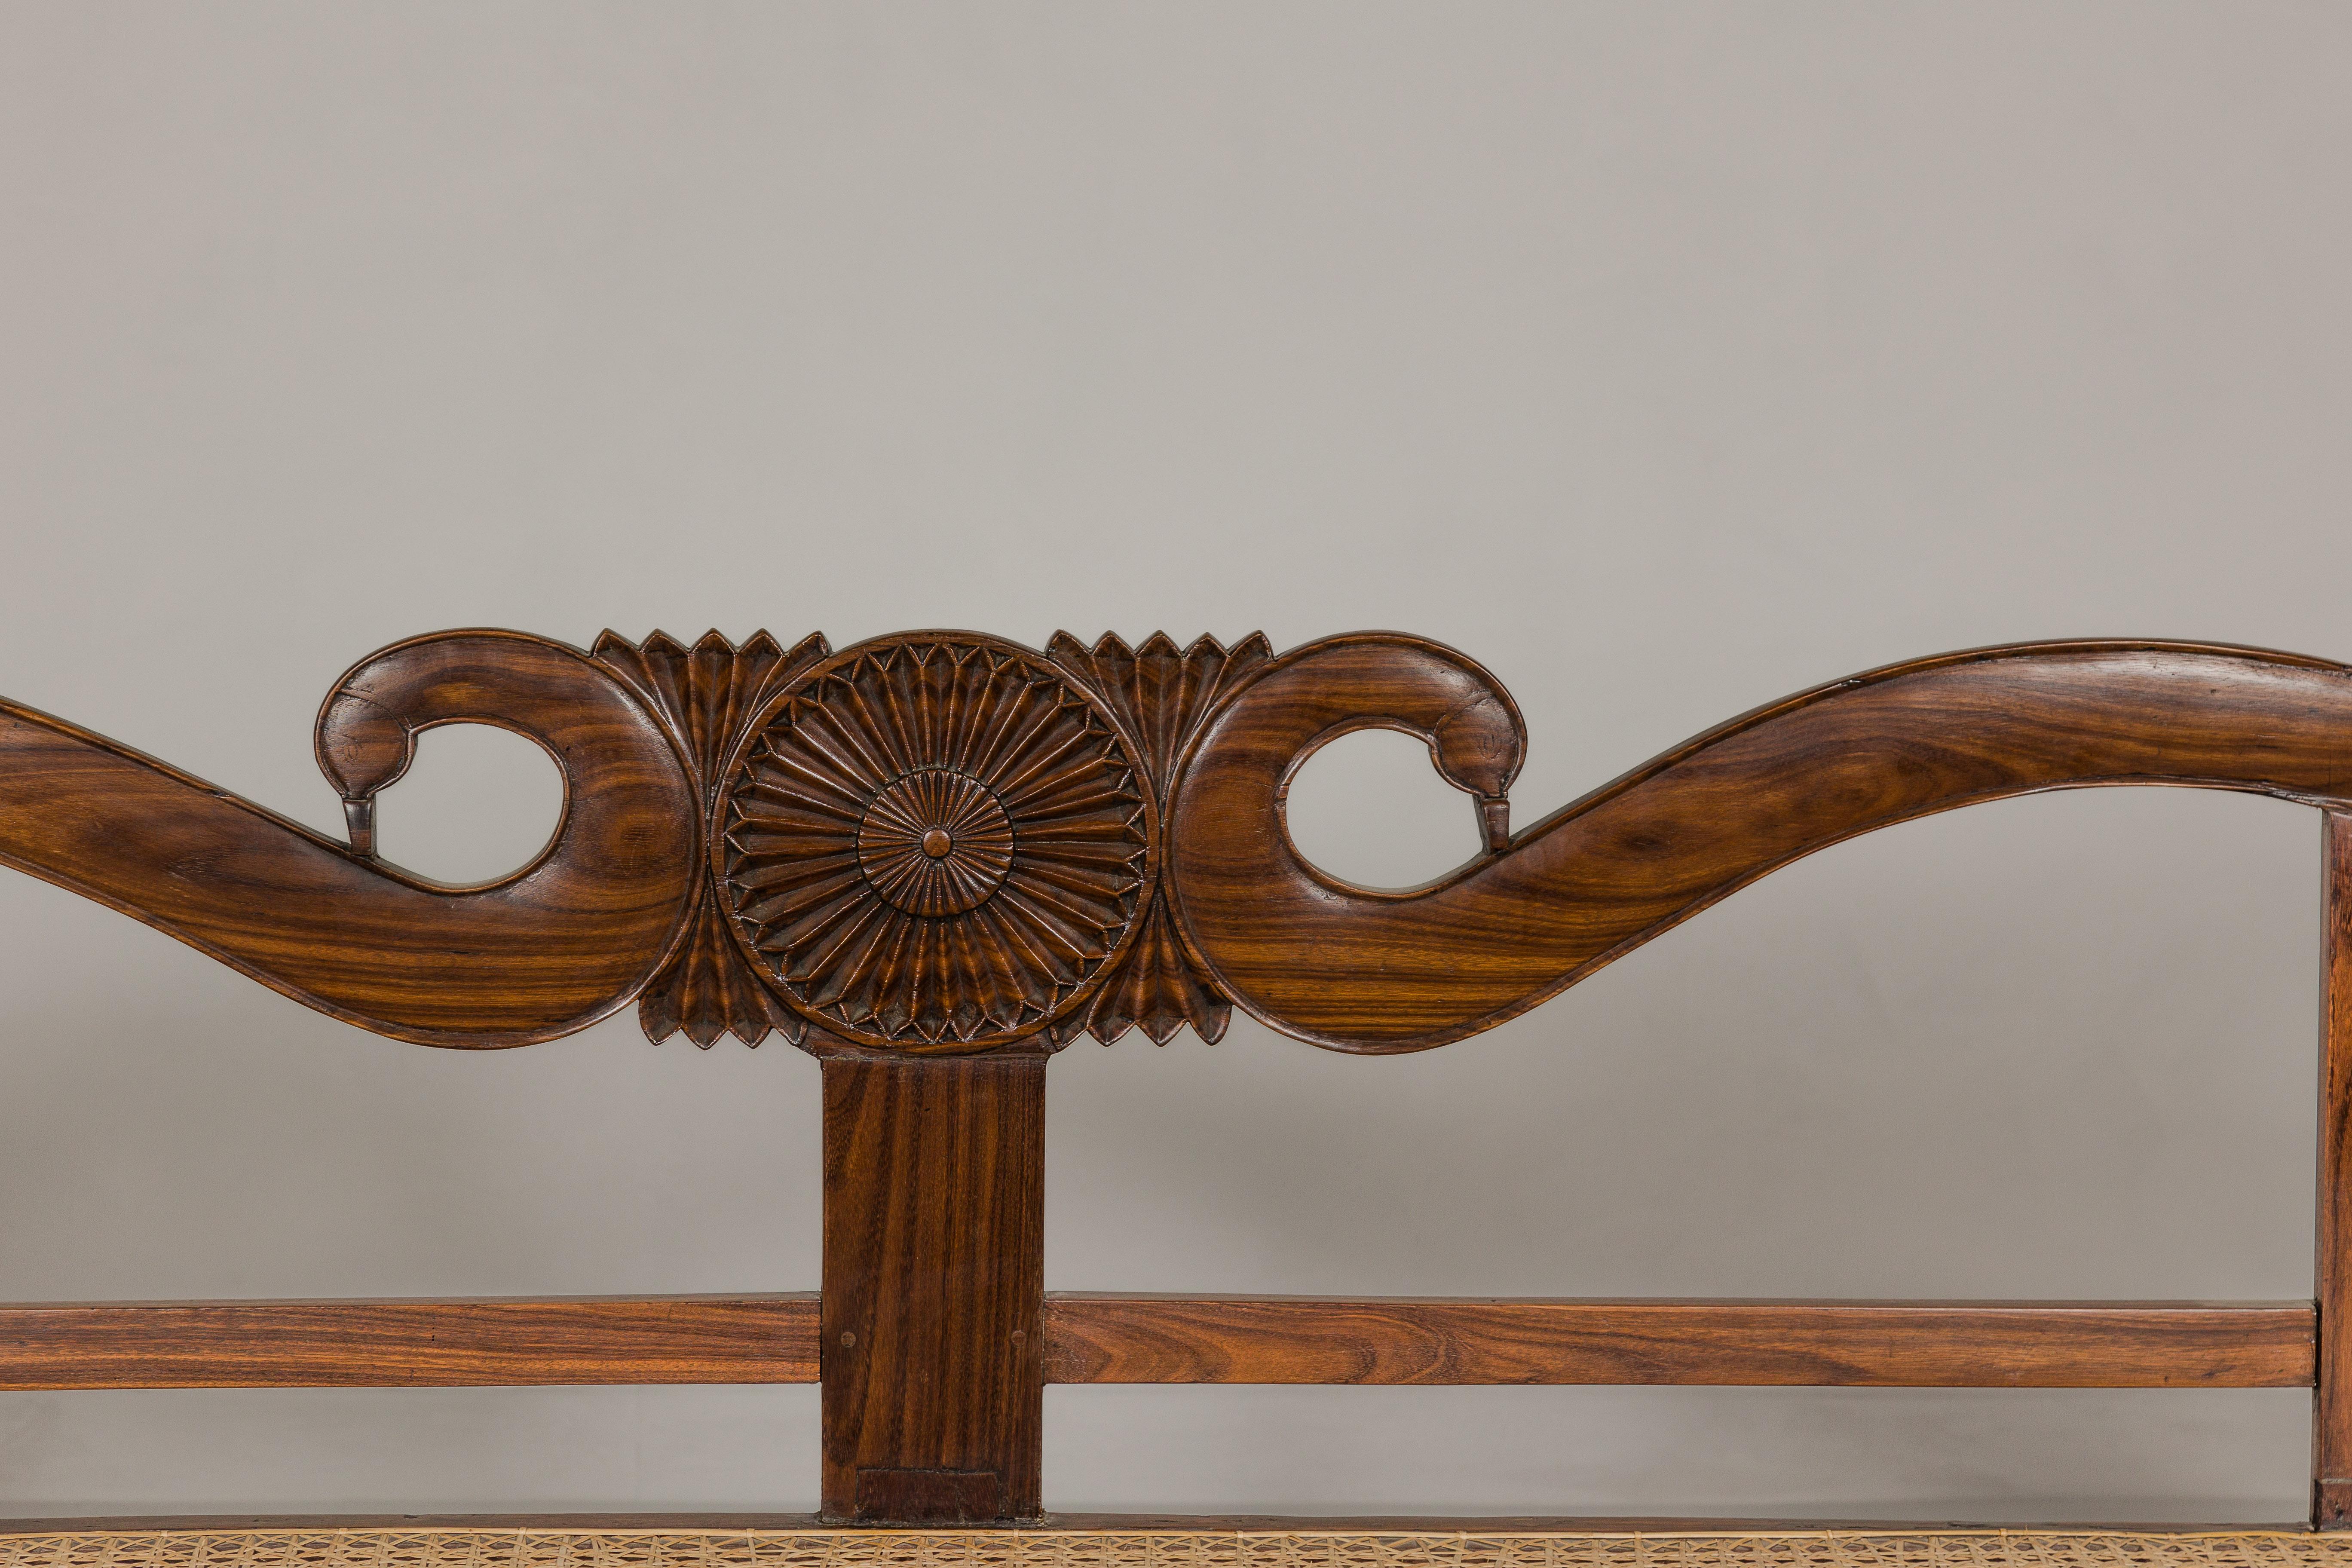 20th Century British Colonial Carved and Cane Settee with Swan Neck Back and Scrolling Arms For Sale